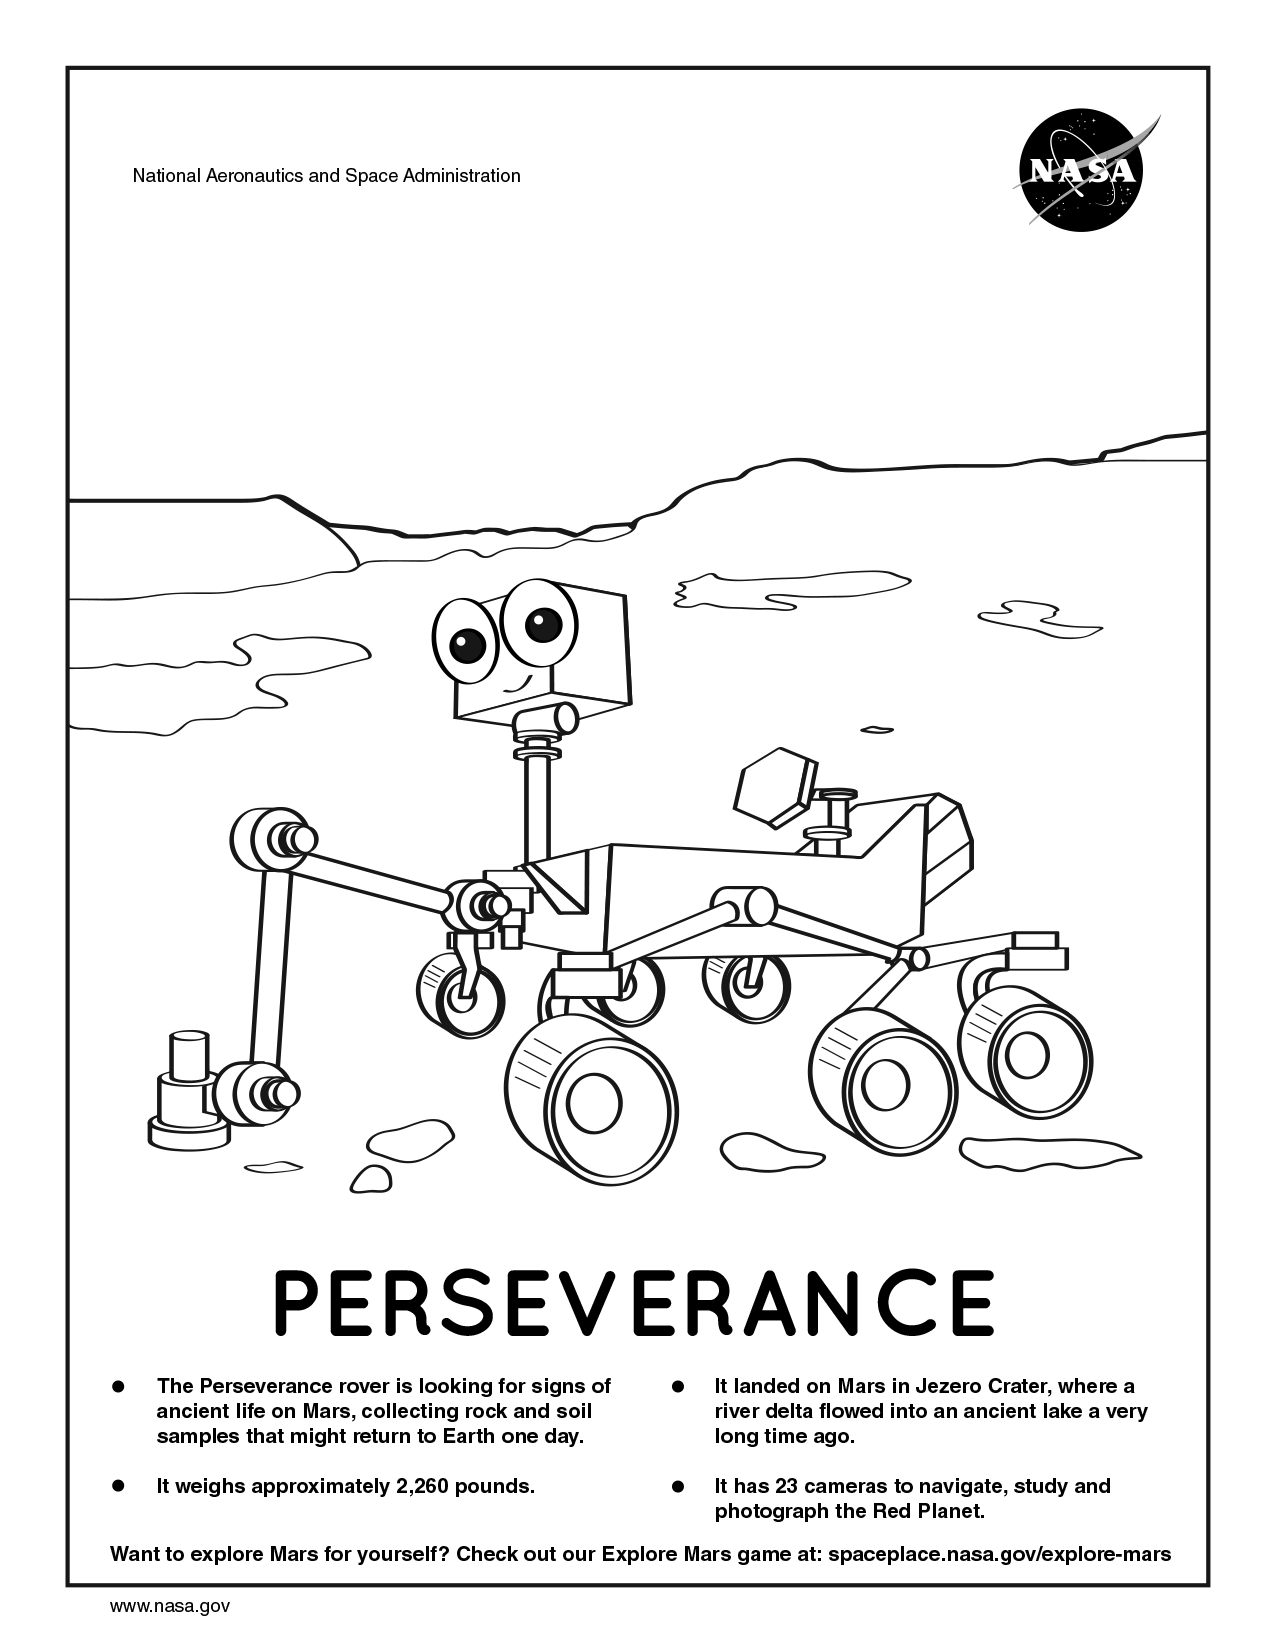 Coloring page for Perseverance.